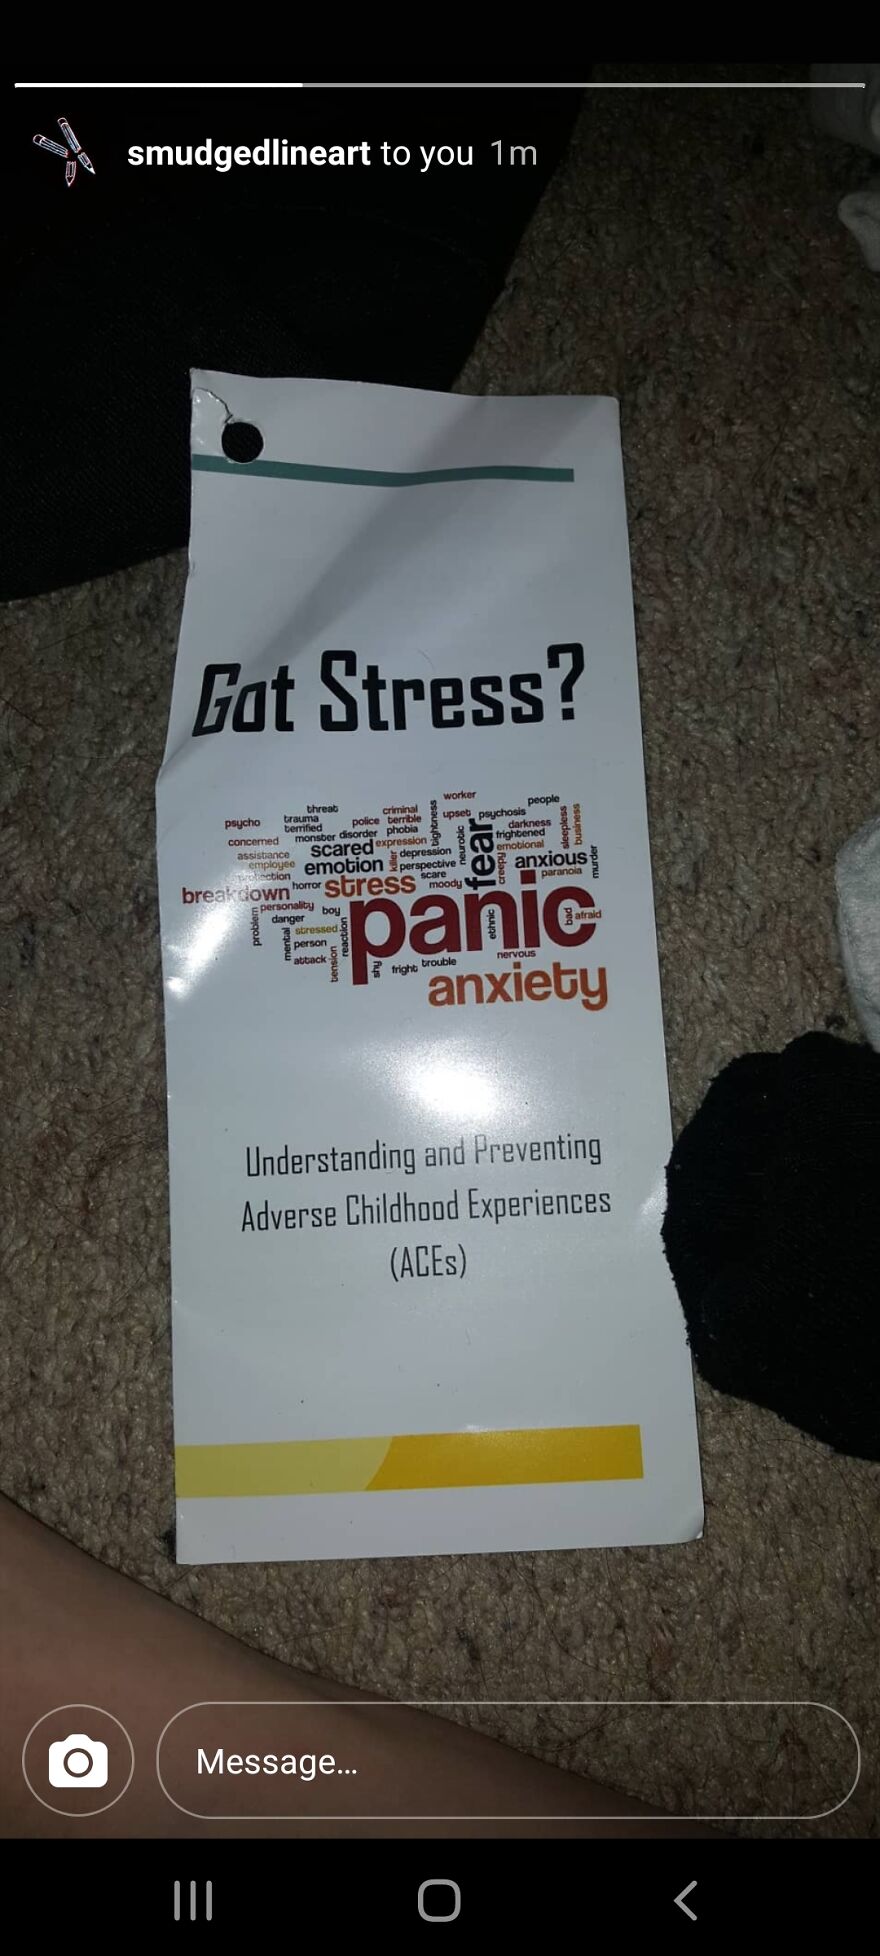 Looks Like Got Stress? P A N I C And Is A Little Misleading At First Glance